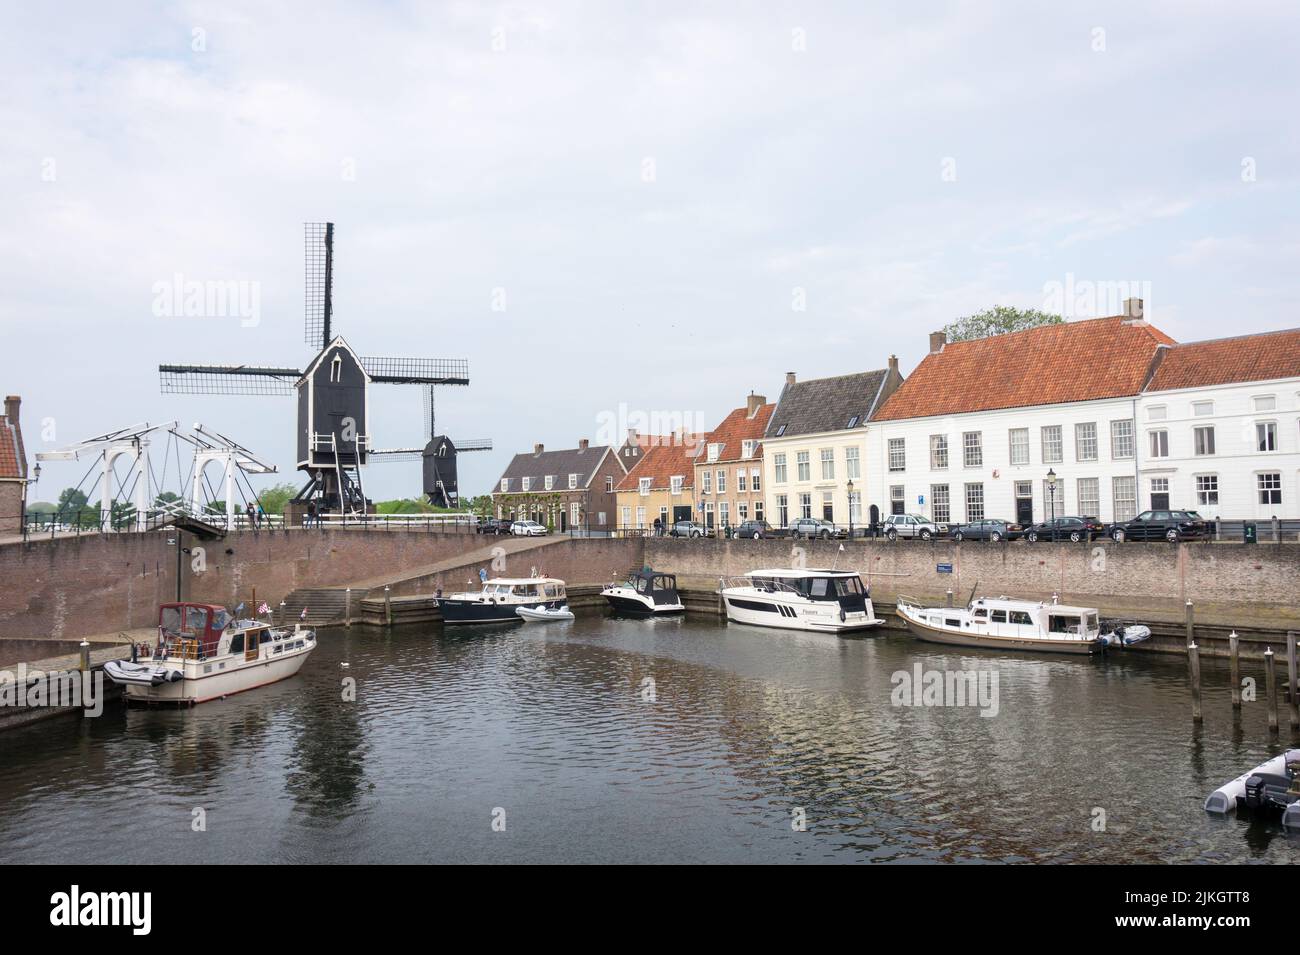 Heusden, Brabant, the Netherlands - May 7, 2022: Drawbridge and windmill at the harbor with boats in a beautiful fortress city Heusden. Stock Photo